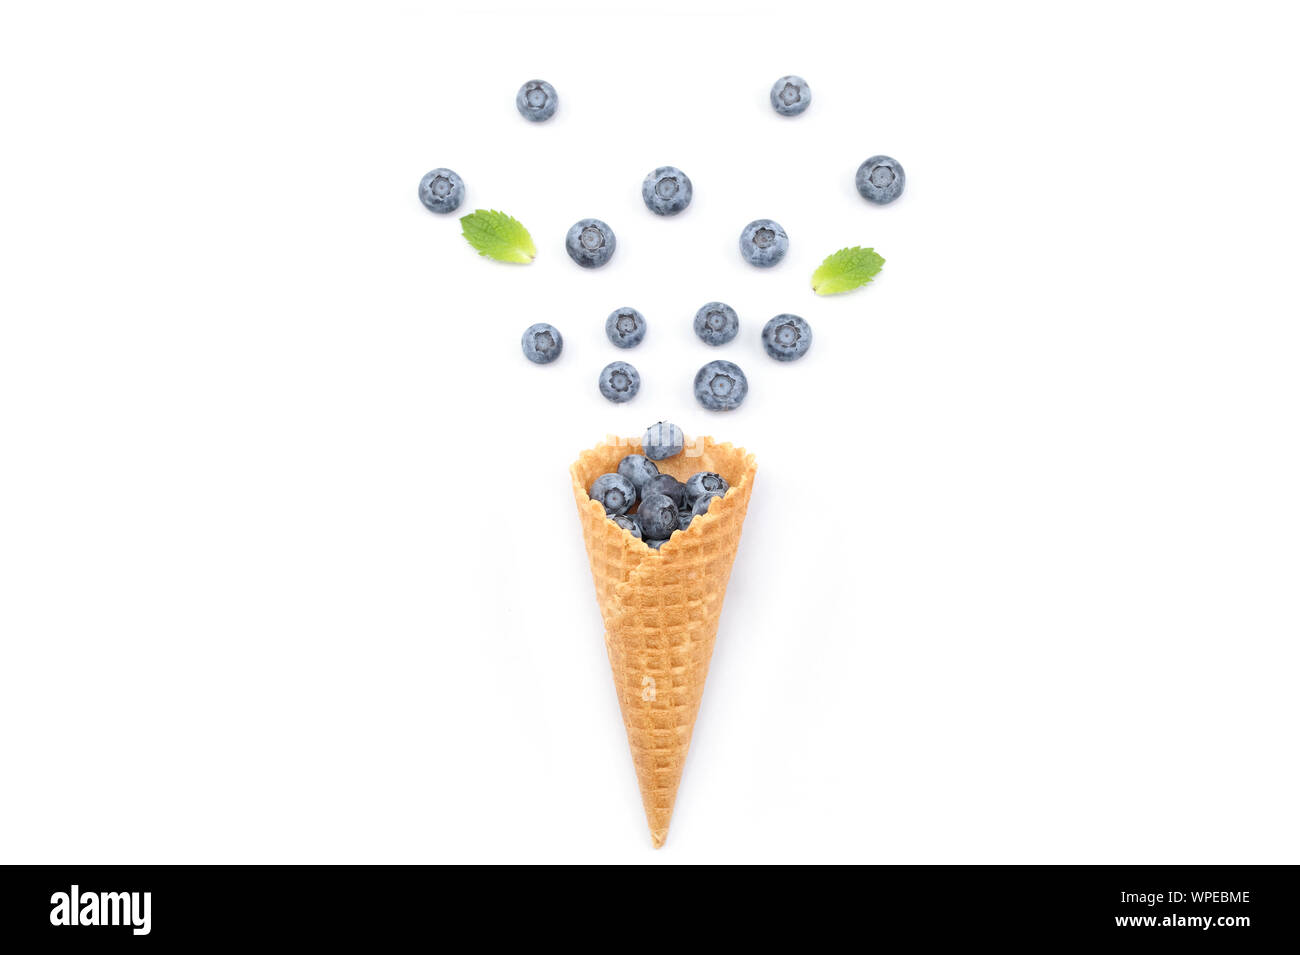 Ice cream wafer cone filled with blueberries. Food concept ,horizontal with copy space.Menu design,food pattern background. Stock Photo